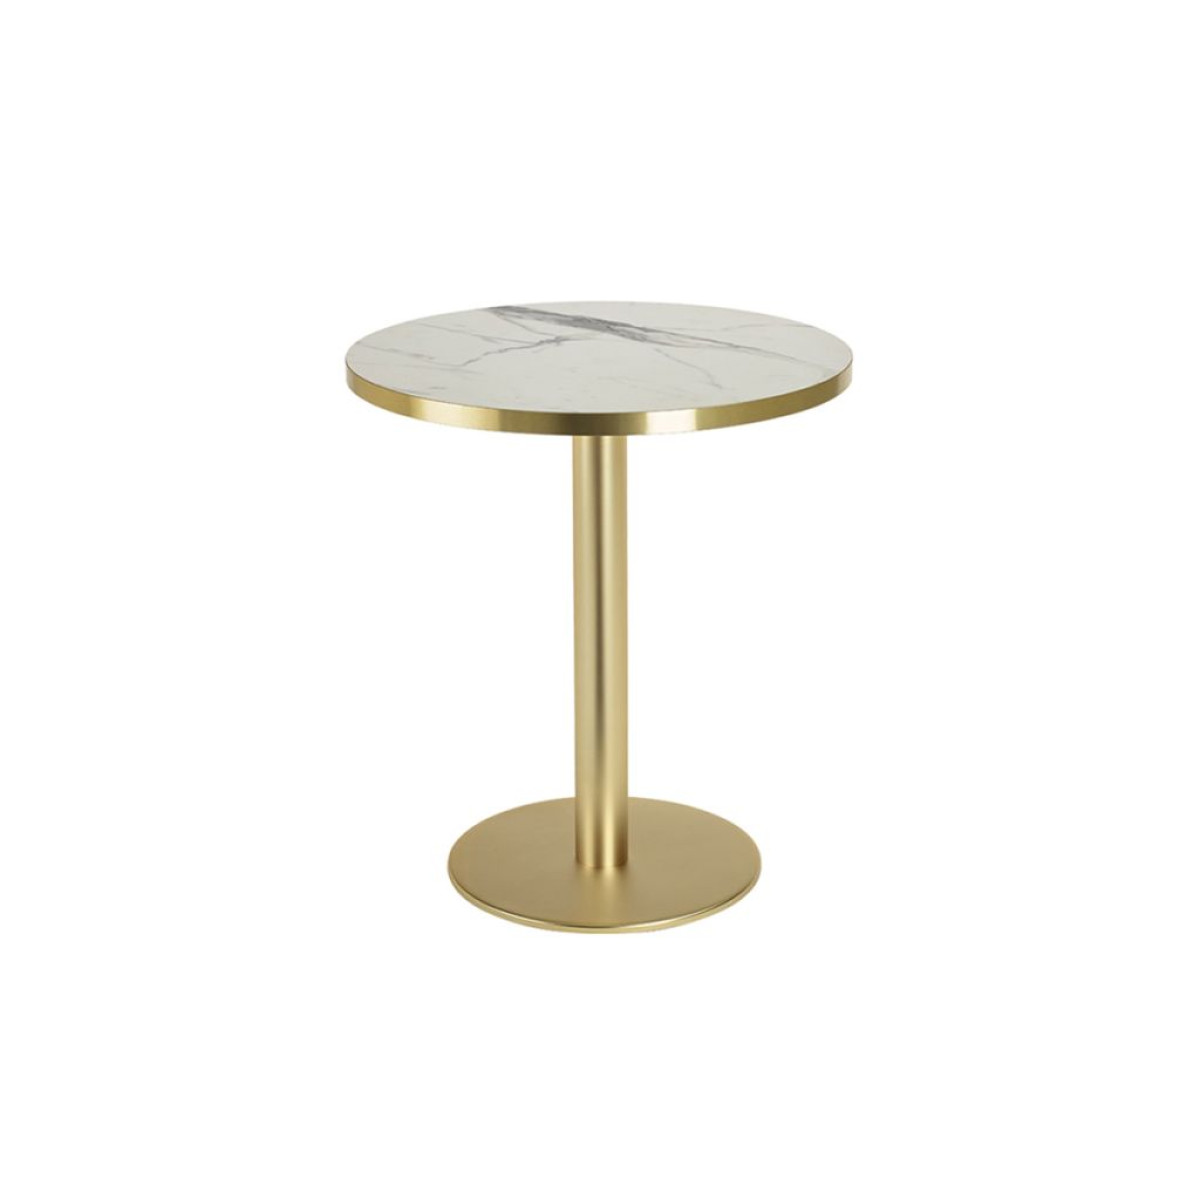 Tiffany laminate brass ABS top